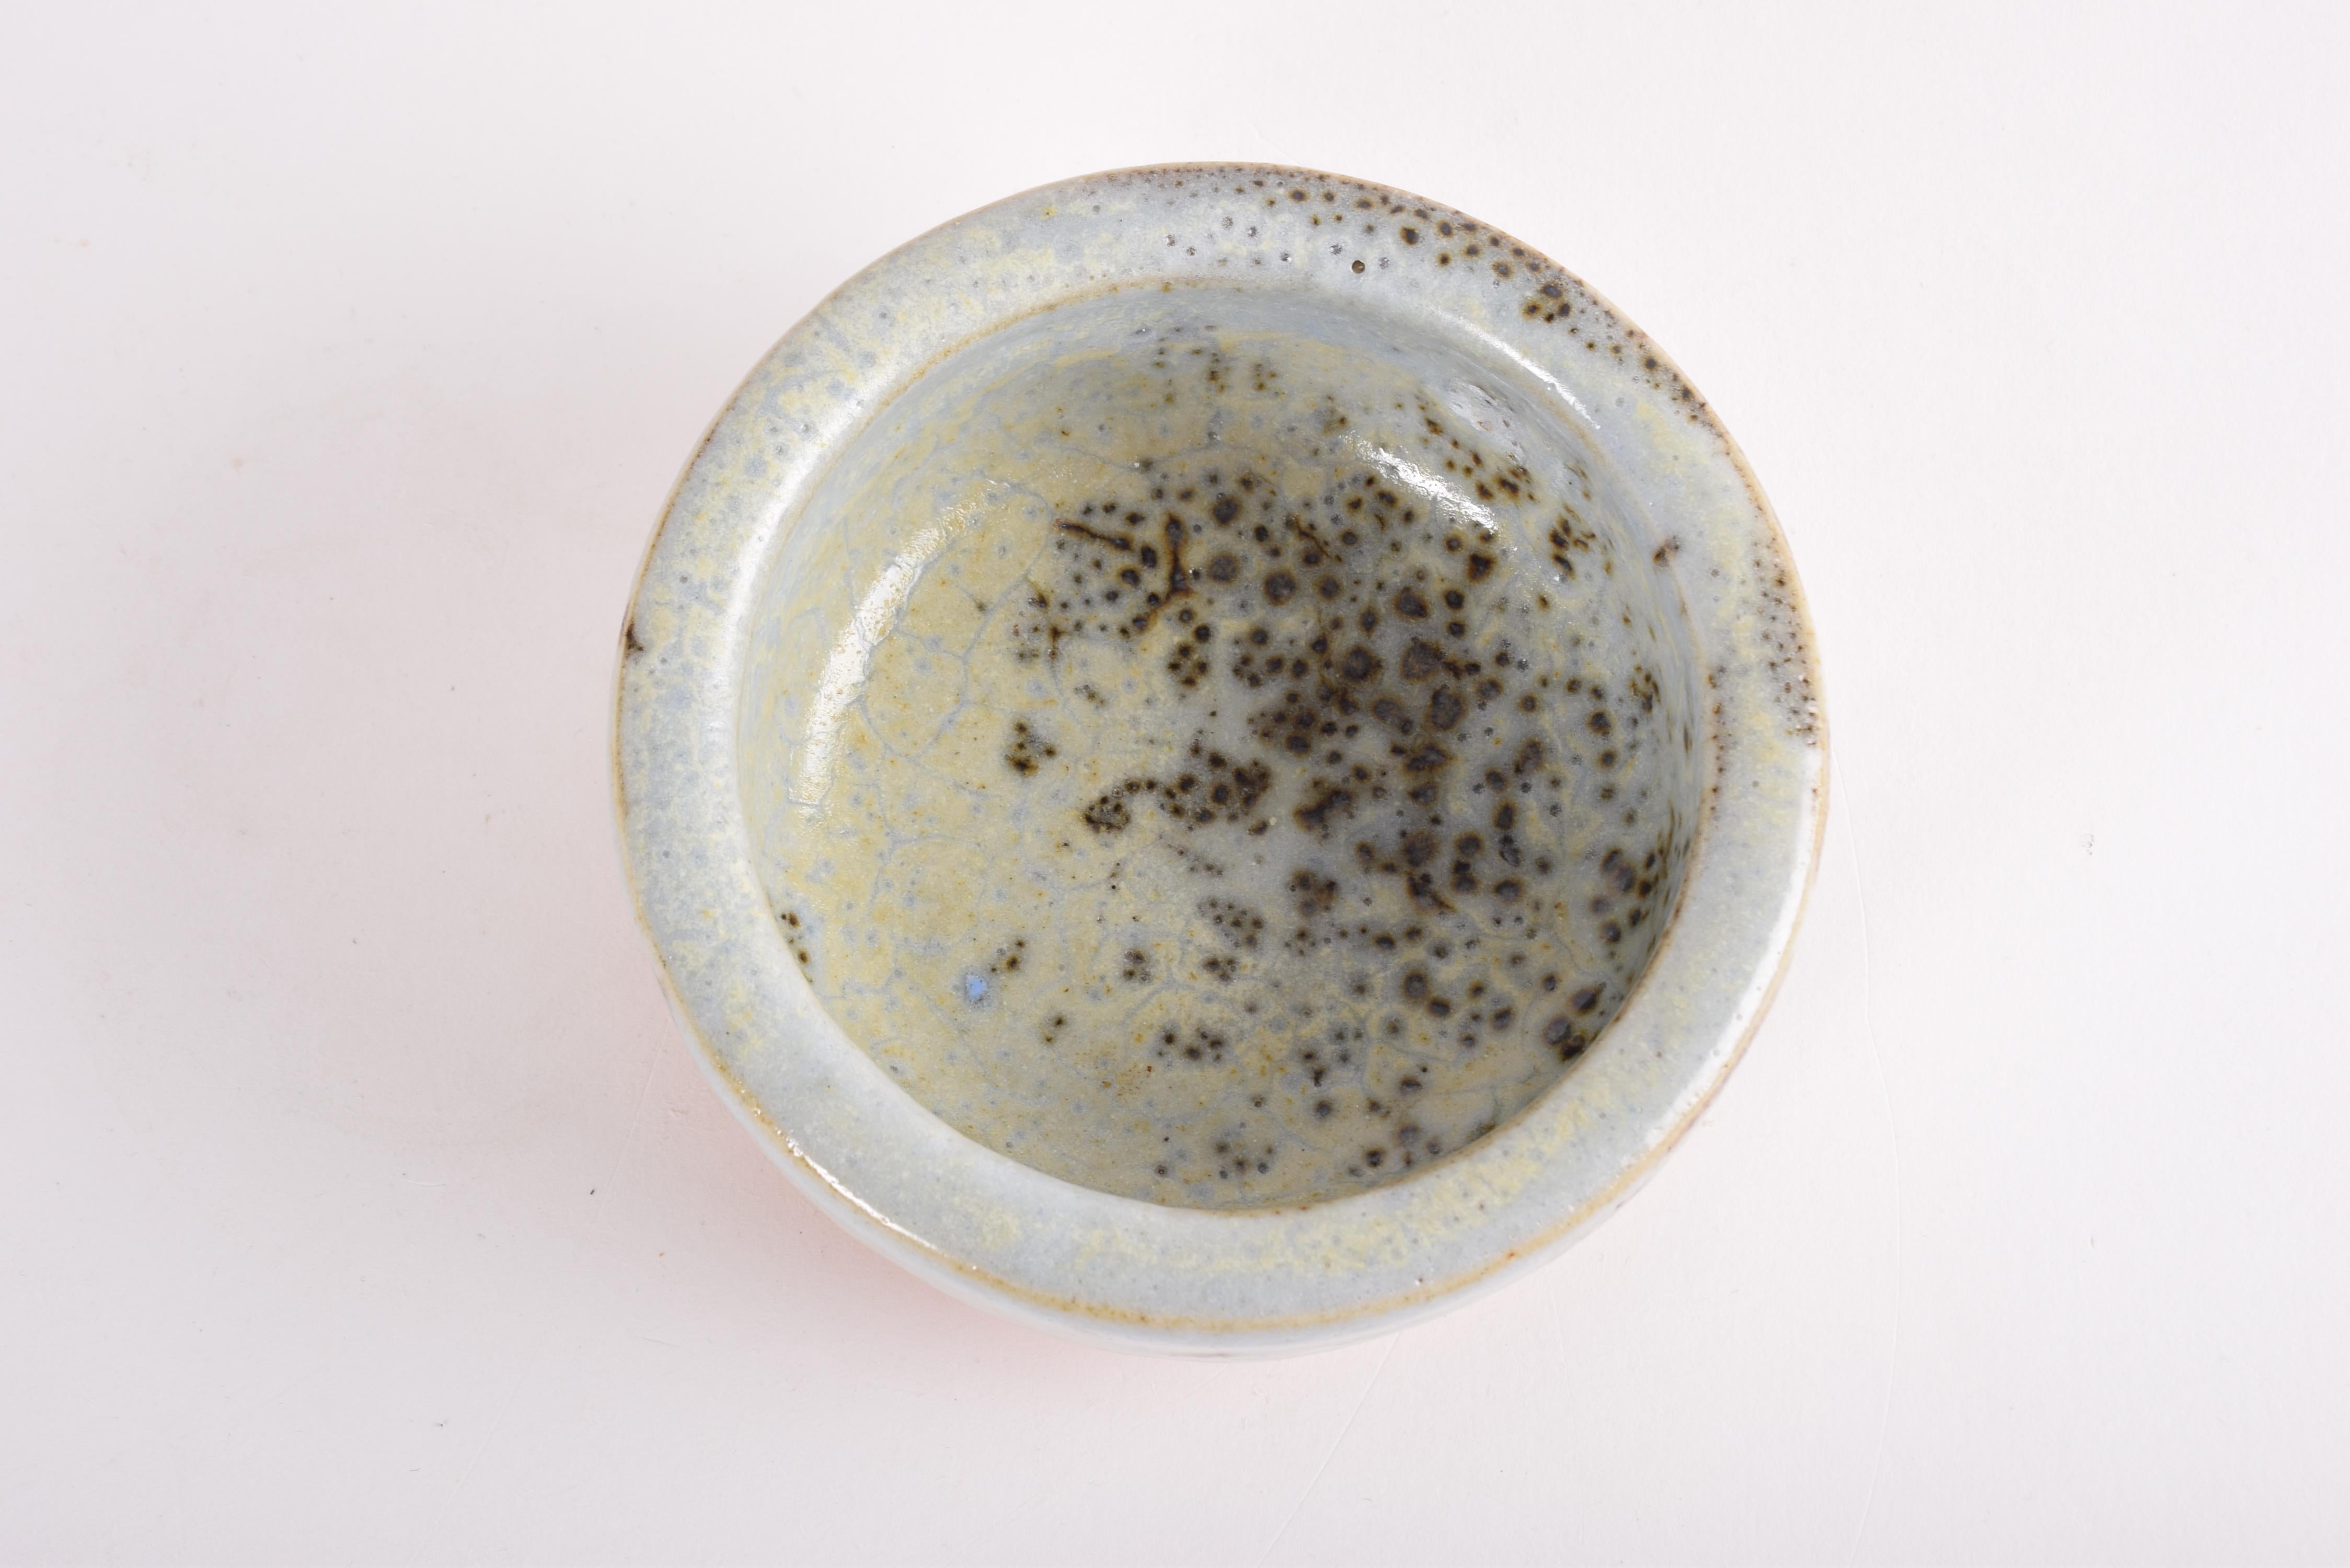 Small bowl by Danish ceramist Jørgen Mogensen (1927-2017) from his own studio. Made ca 1960s.
The bowl is made from stoneware and has thick walls. It is covered with a gray and pale blue glaze with pale yellow elements and small dark brown